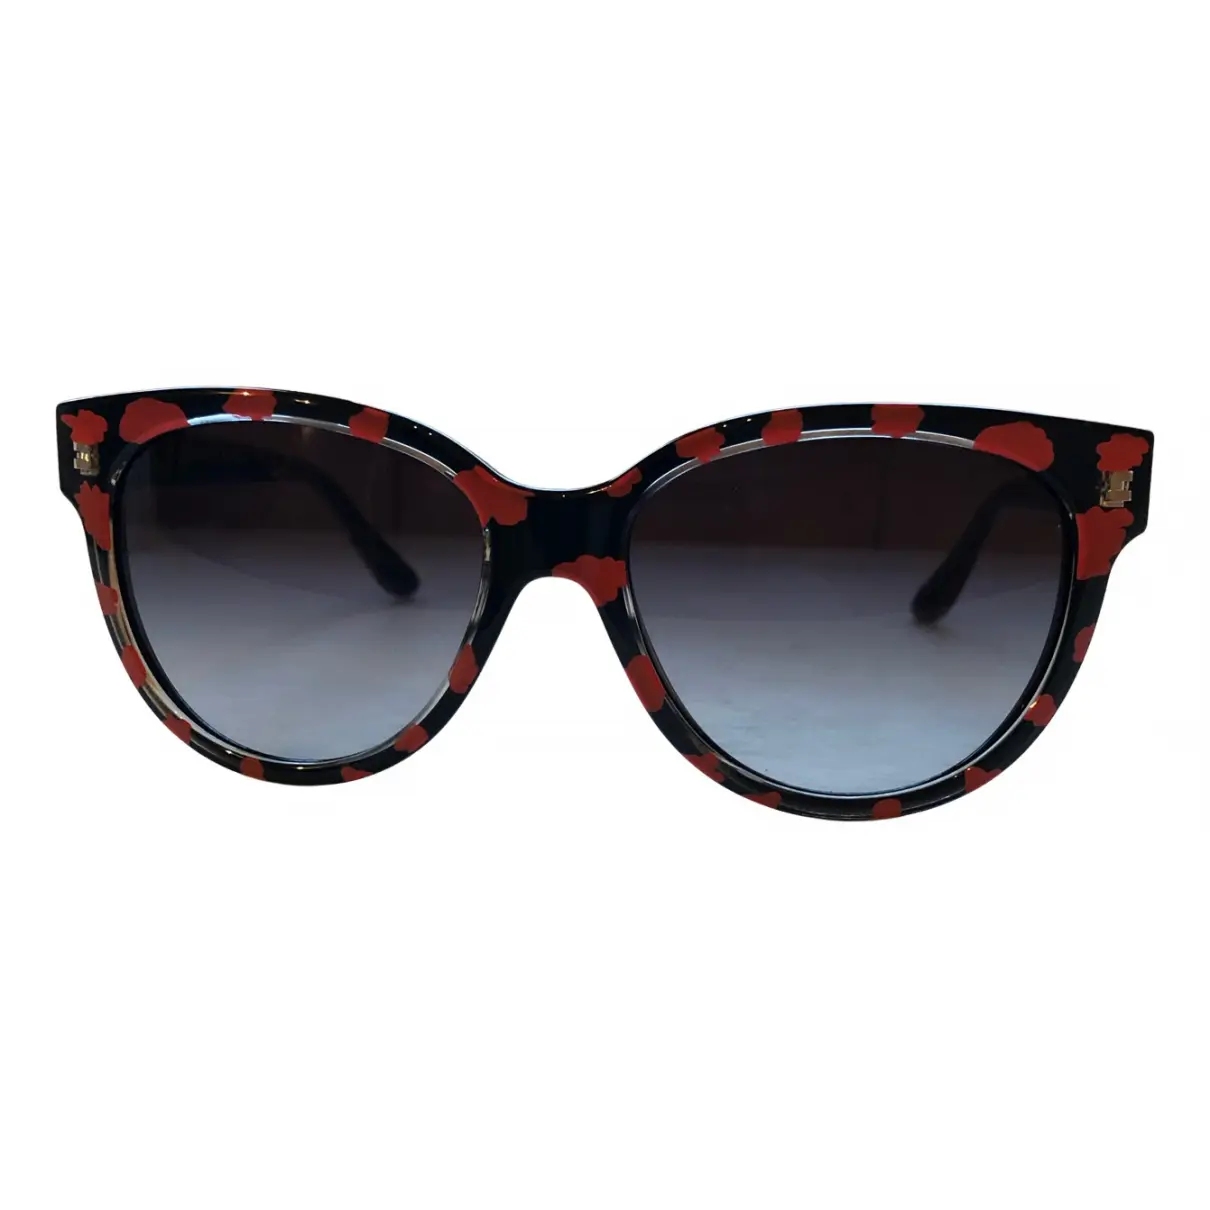 Oversized sunglasses Marc by Marc Jacobs